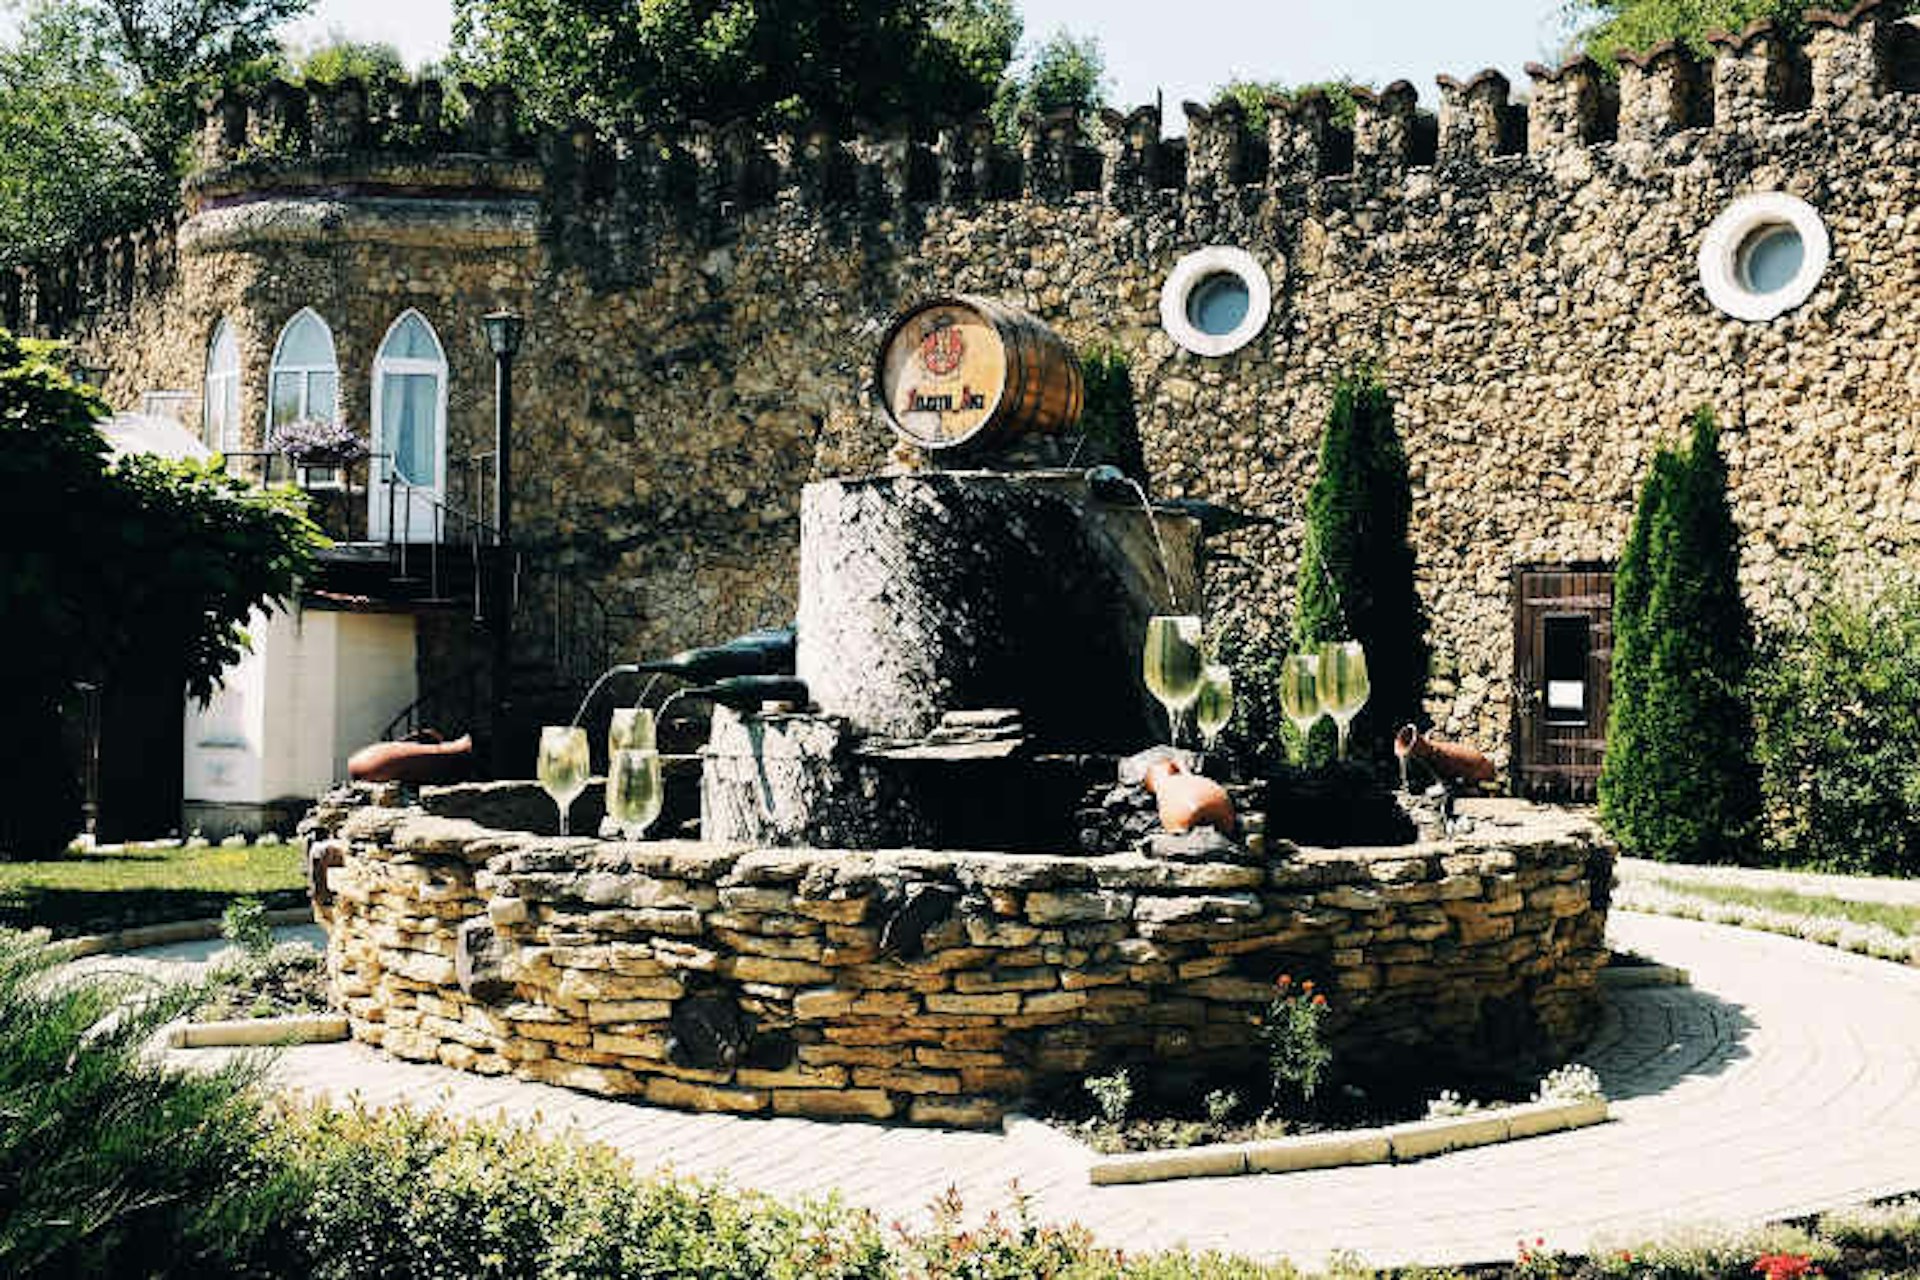 Statues and fountains greet visitors to the Mileştii Mici winery. Image by Mark Baker / Lonely Planet